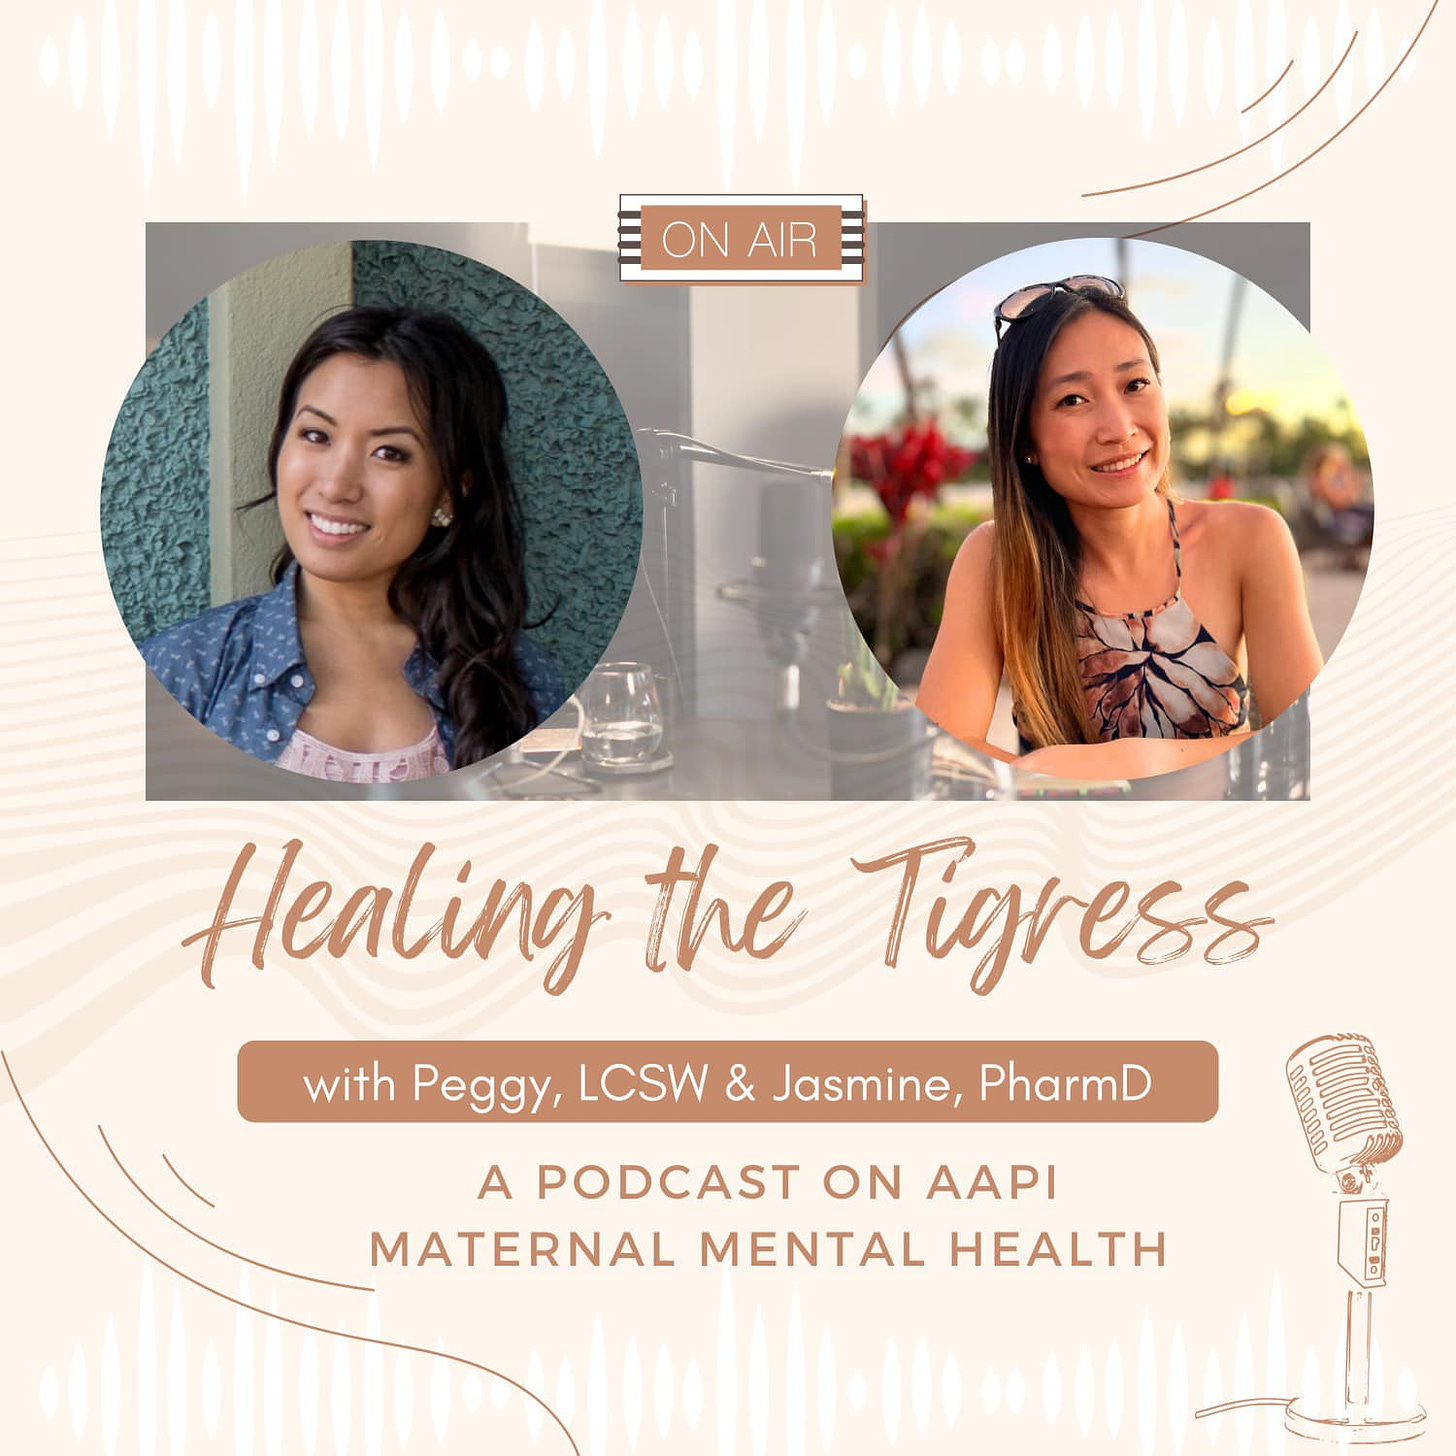 May be an image of 2 people and text that says 'ON AIR Healing the Tigress with Peggy, LCSW & Jasmine, PharmD A PODCAST ON AAPI MATERNAL MENTAL HEALTH'